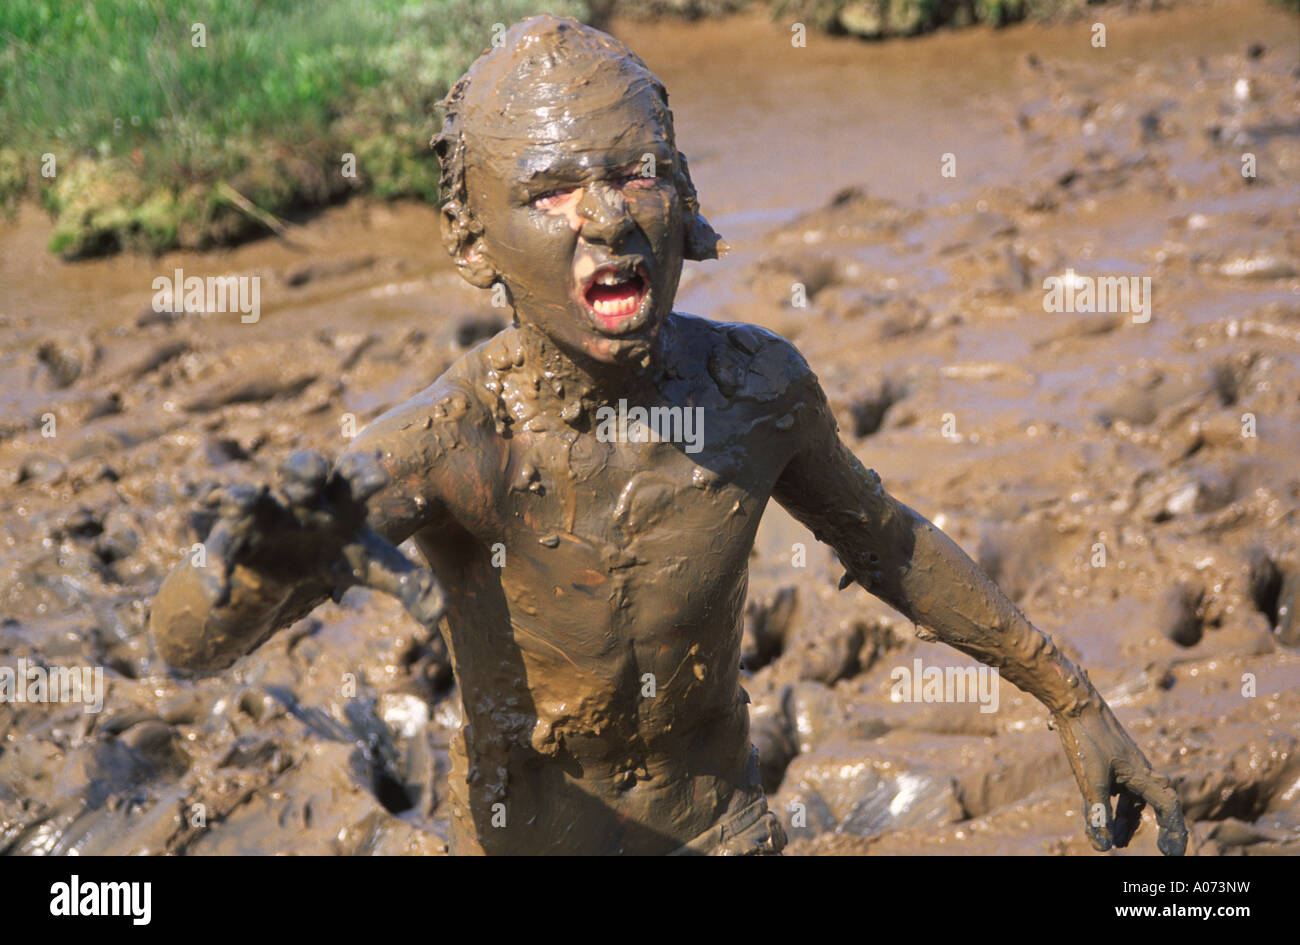 monster-like-child-playing-in-thick-mud-with-head-and-body-covered-A073NW.jpg